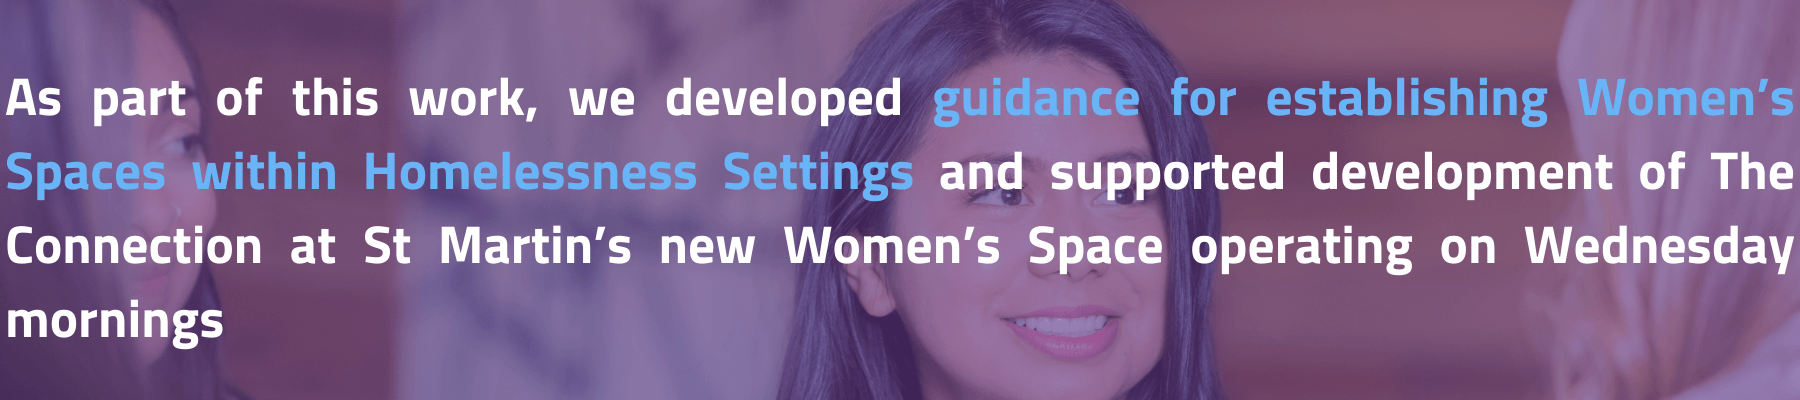 As part of this work, we developed guidance for establishing Women’s Spaces within Homelessness Setting and supported development of The Connection at St Martin’s new women’s space operating on Wednesday mornings